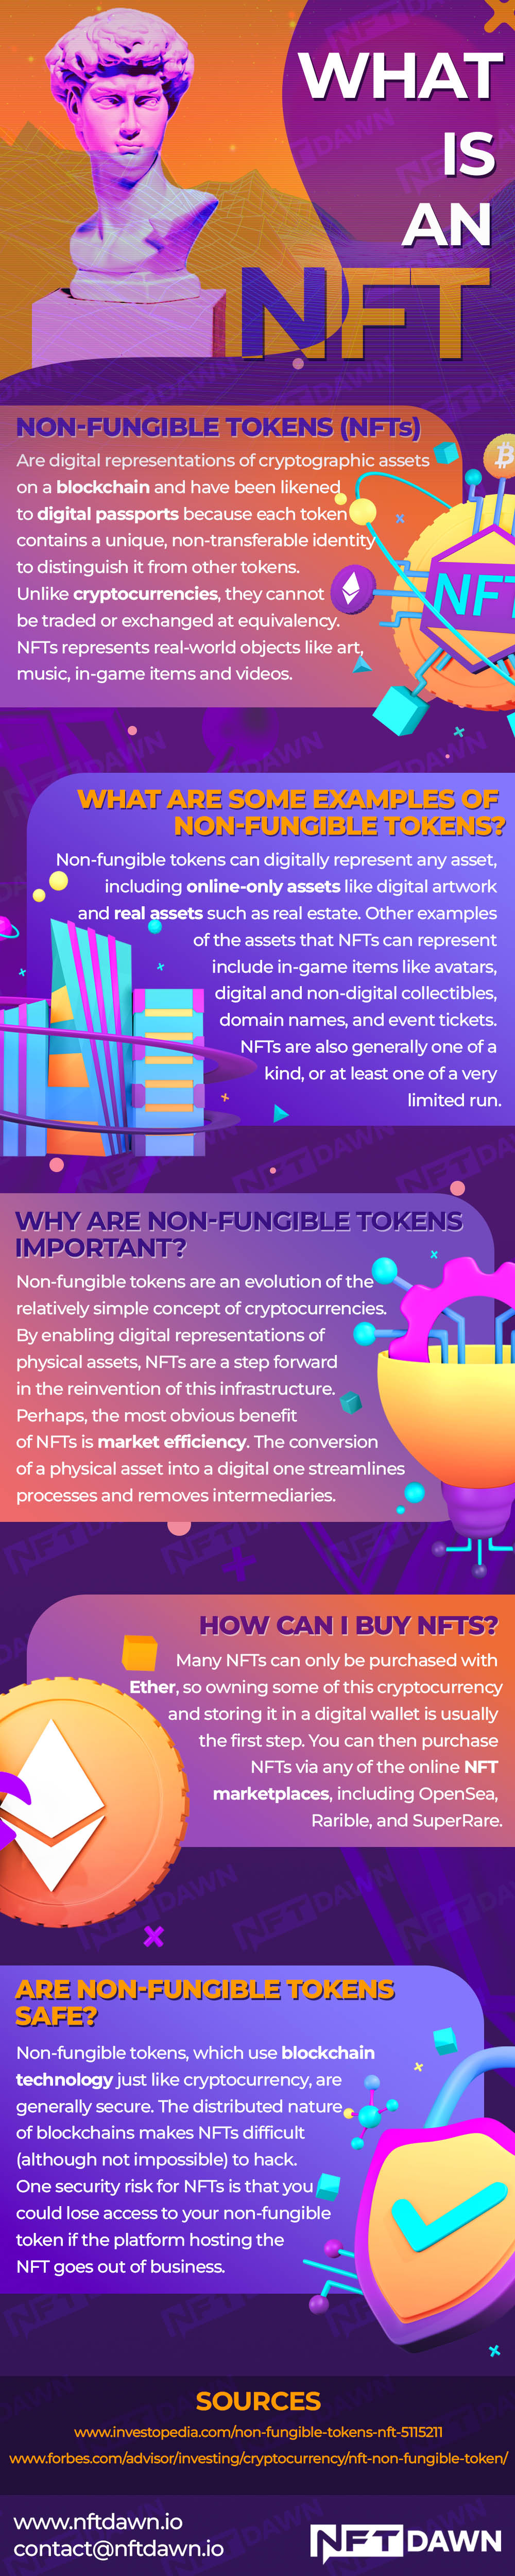 What is an NFT? #infographic # Technology